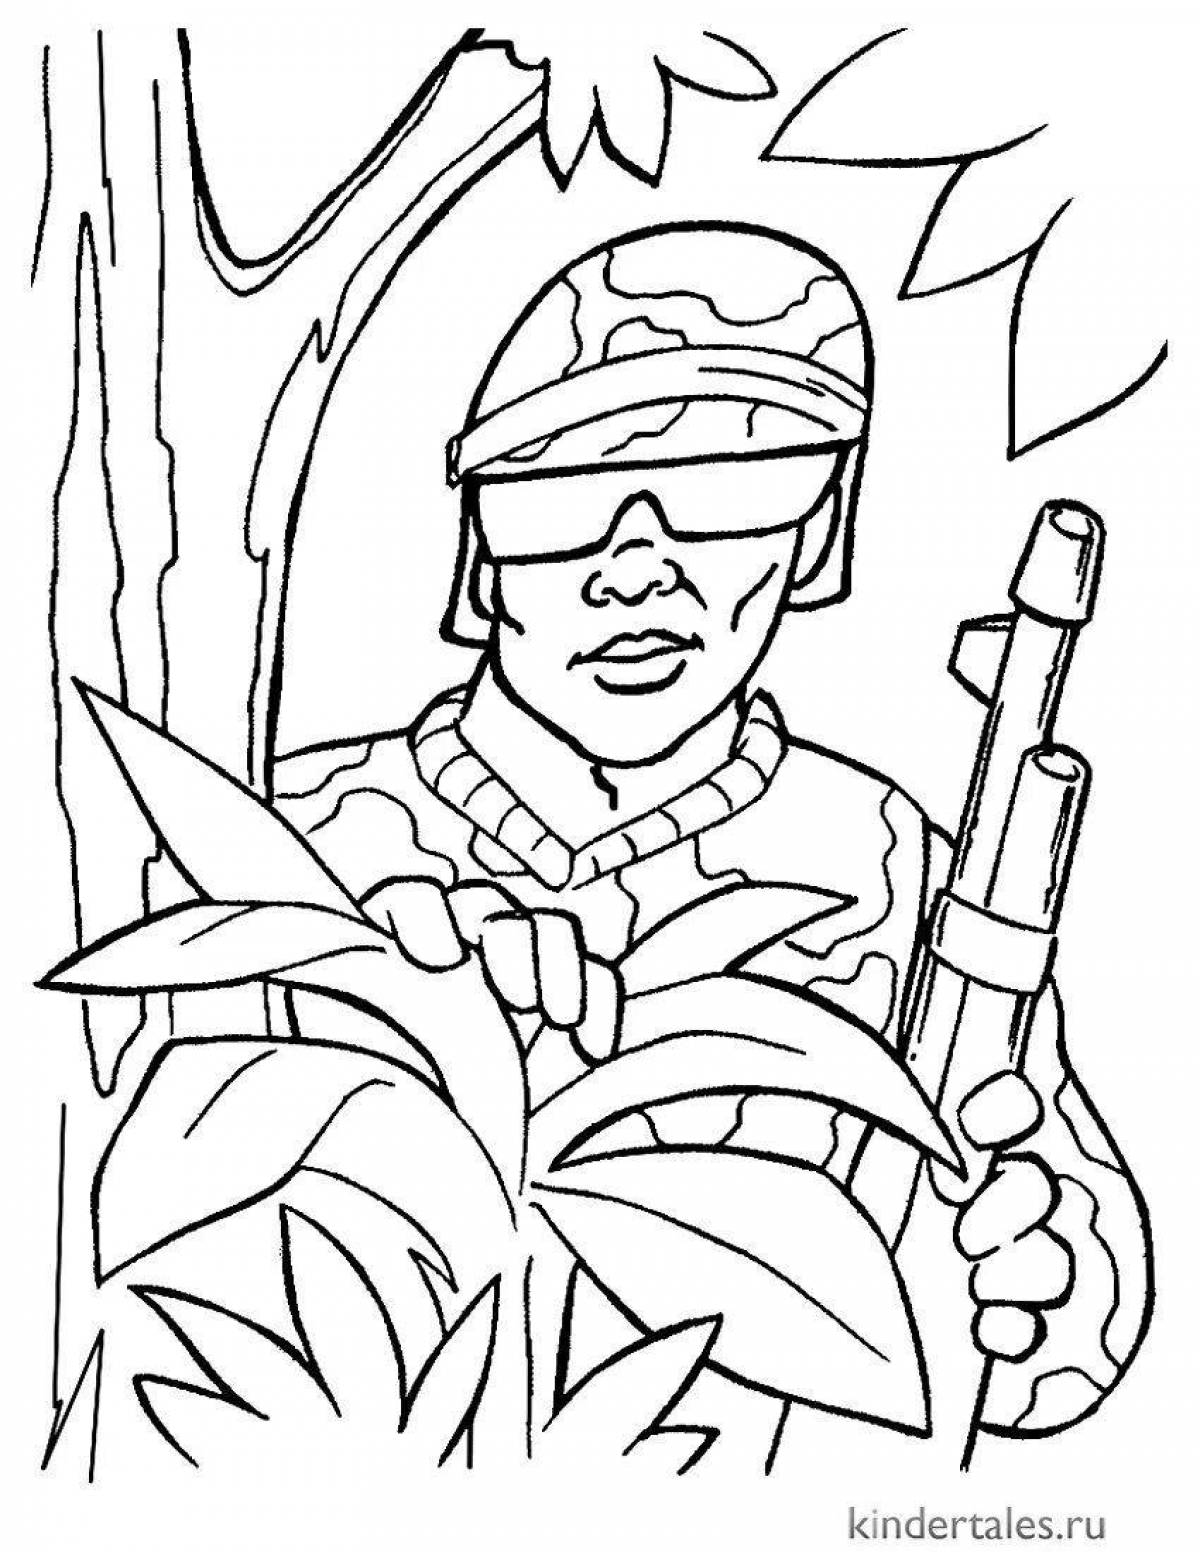 Great army coloring book for kids